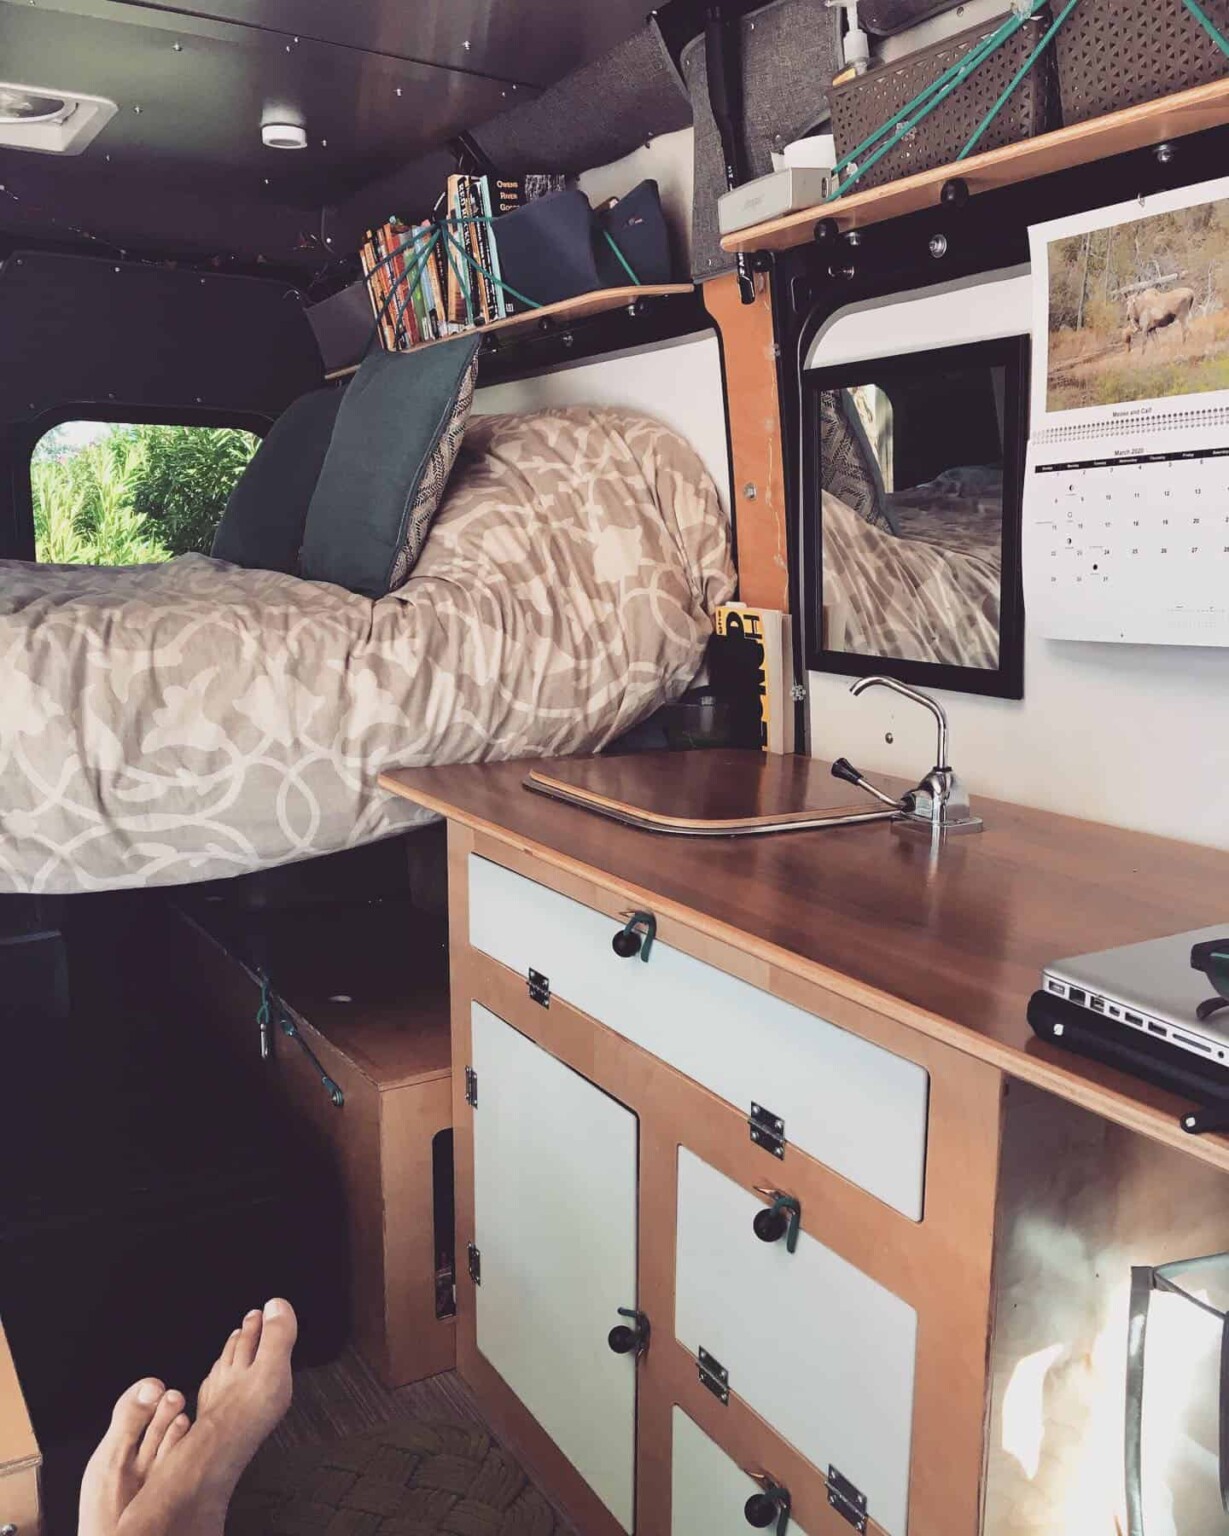 camping-in-a-campervan-conversion